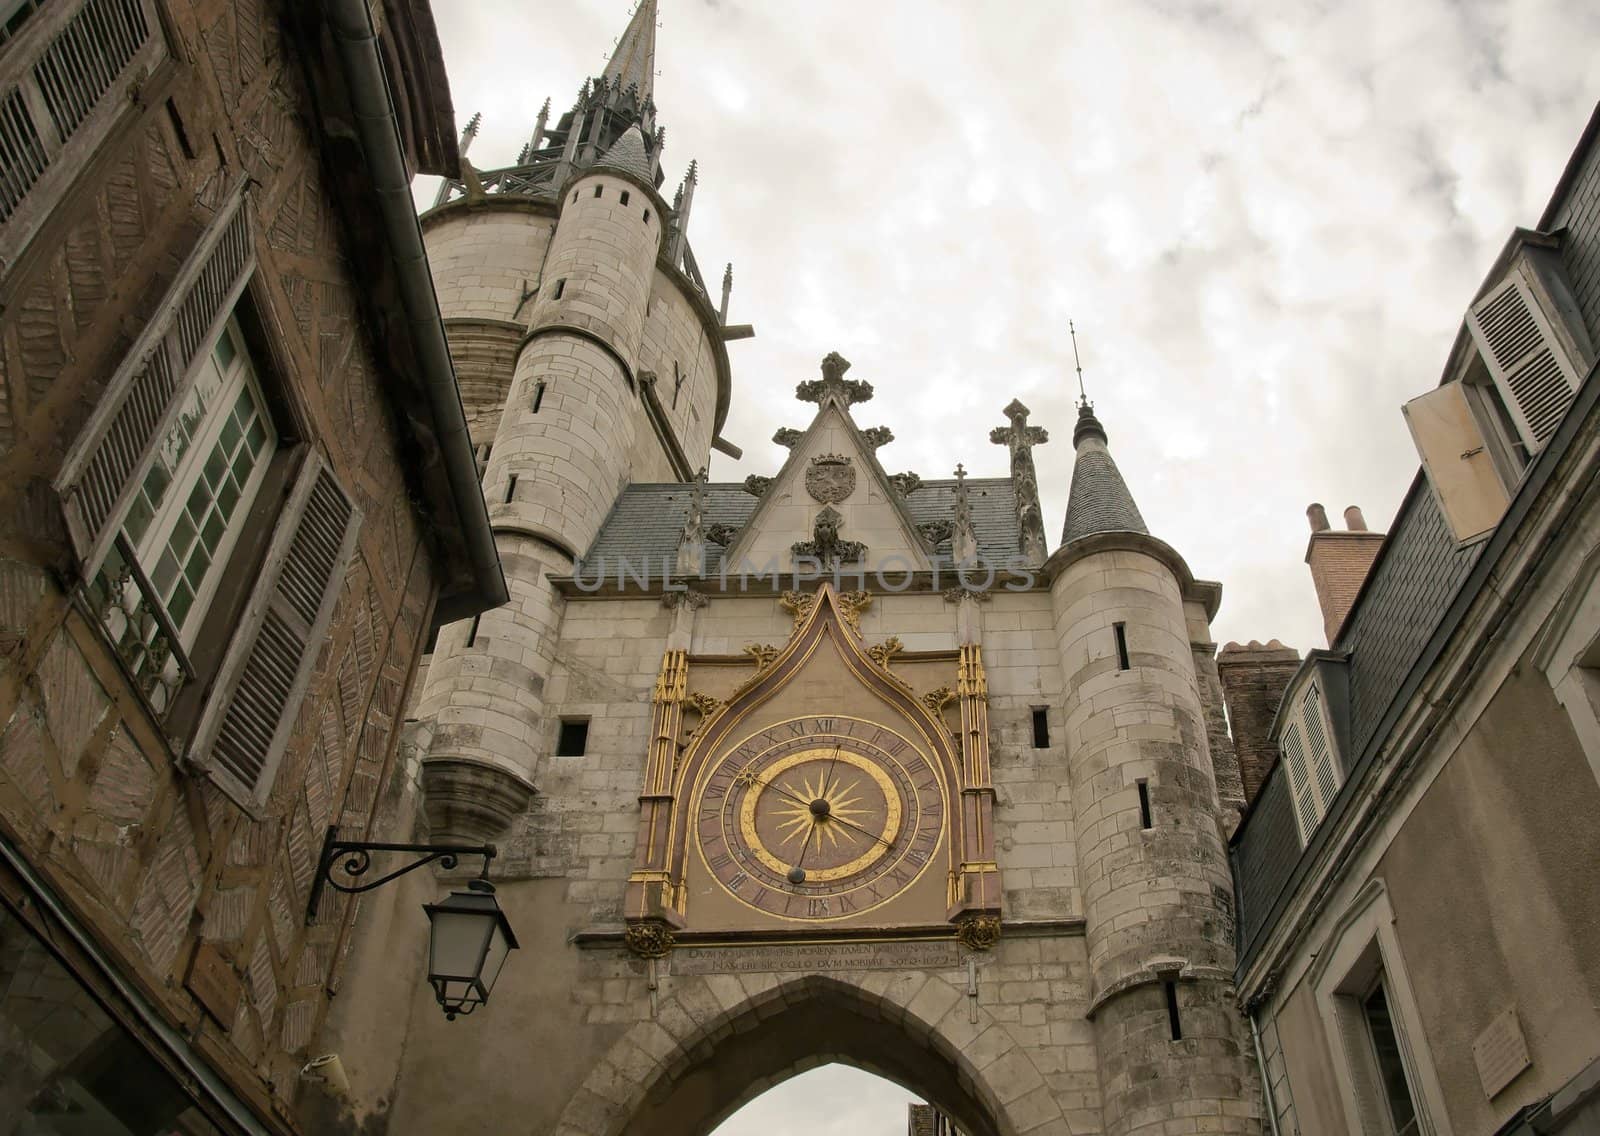 clock of the clock tower (Auxerre Bourgogne France) by neko92vl